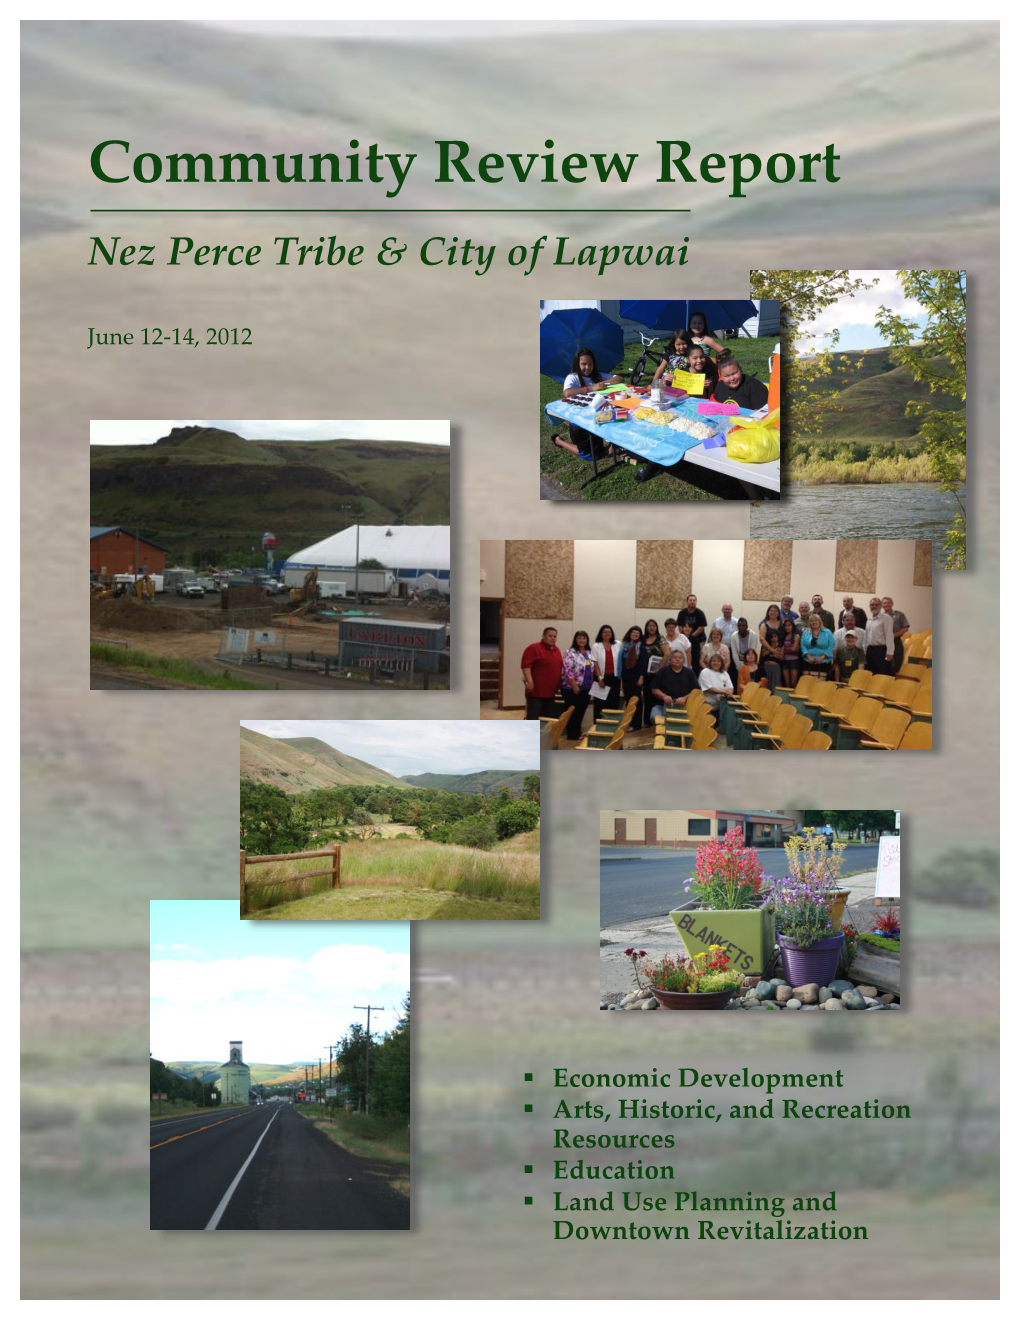 Community Review Report: Nez Perce Tribe and City of Lapwai